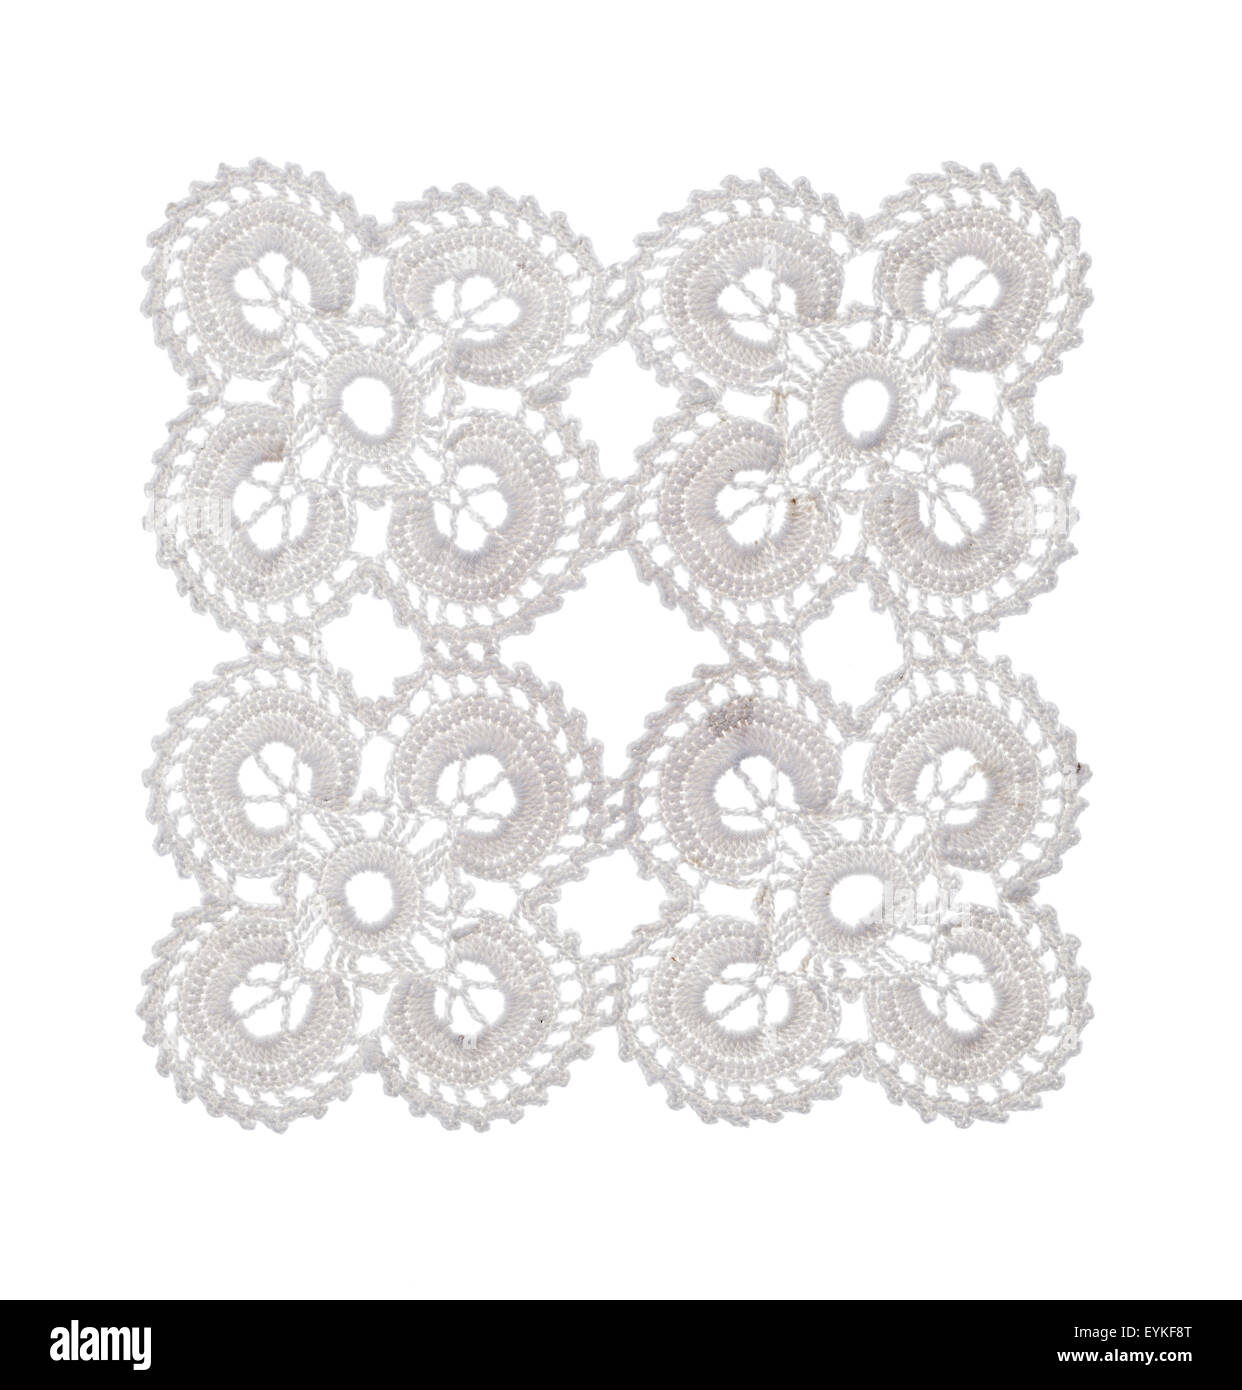 White lace doily before background as a cut out Stock Photo